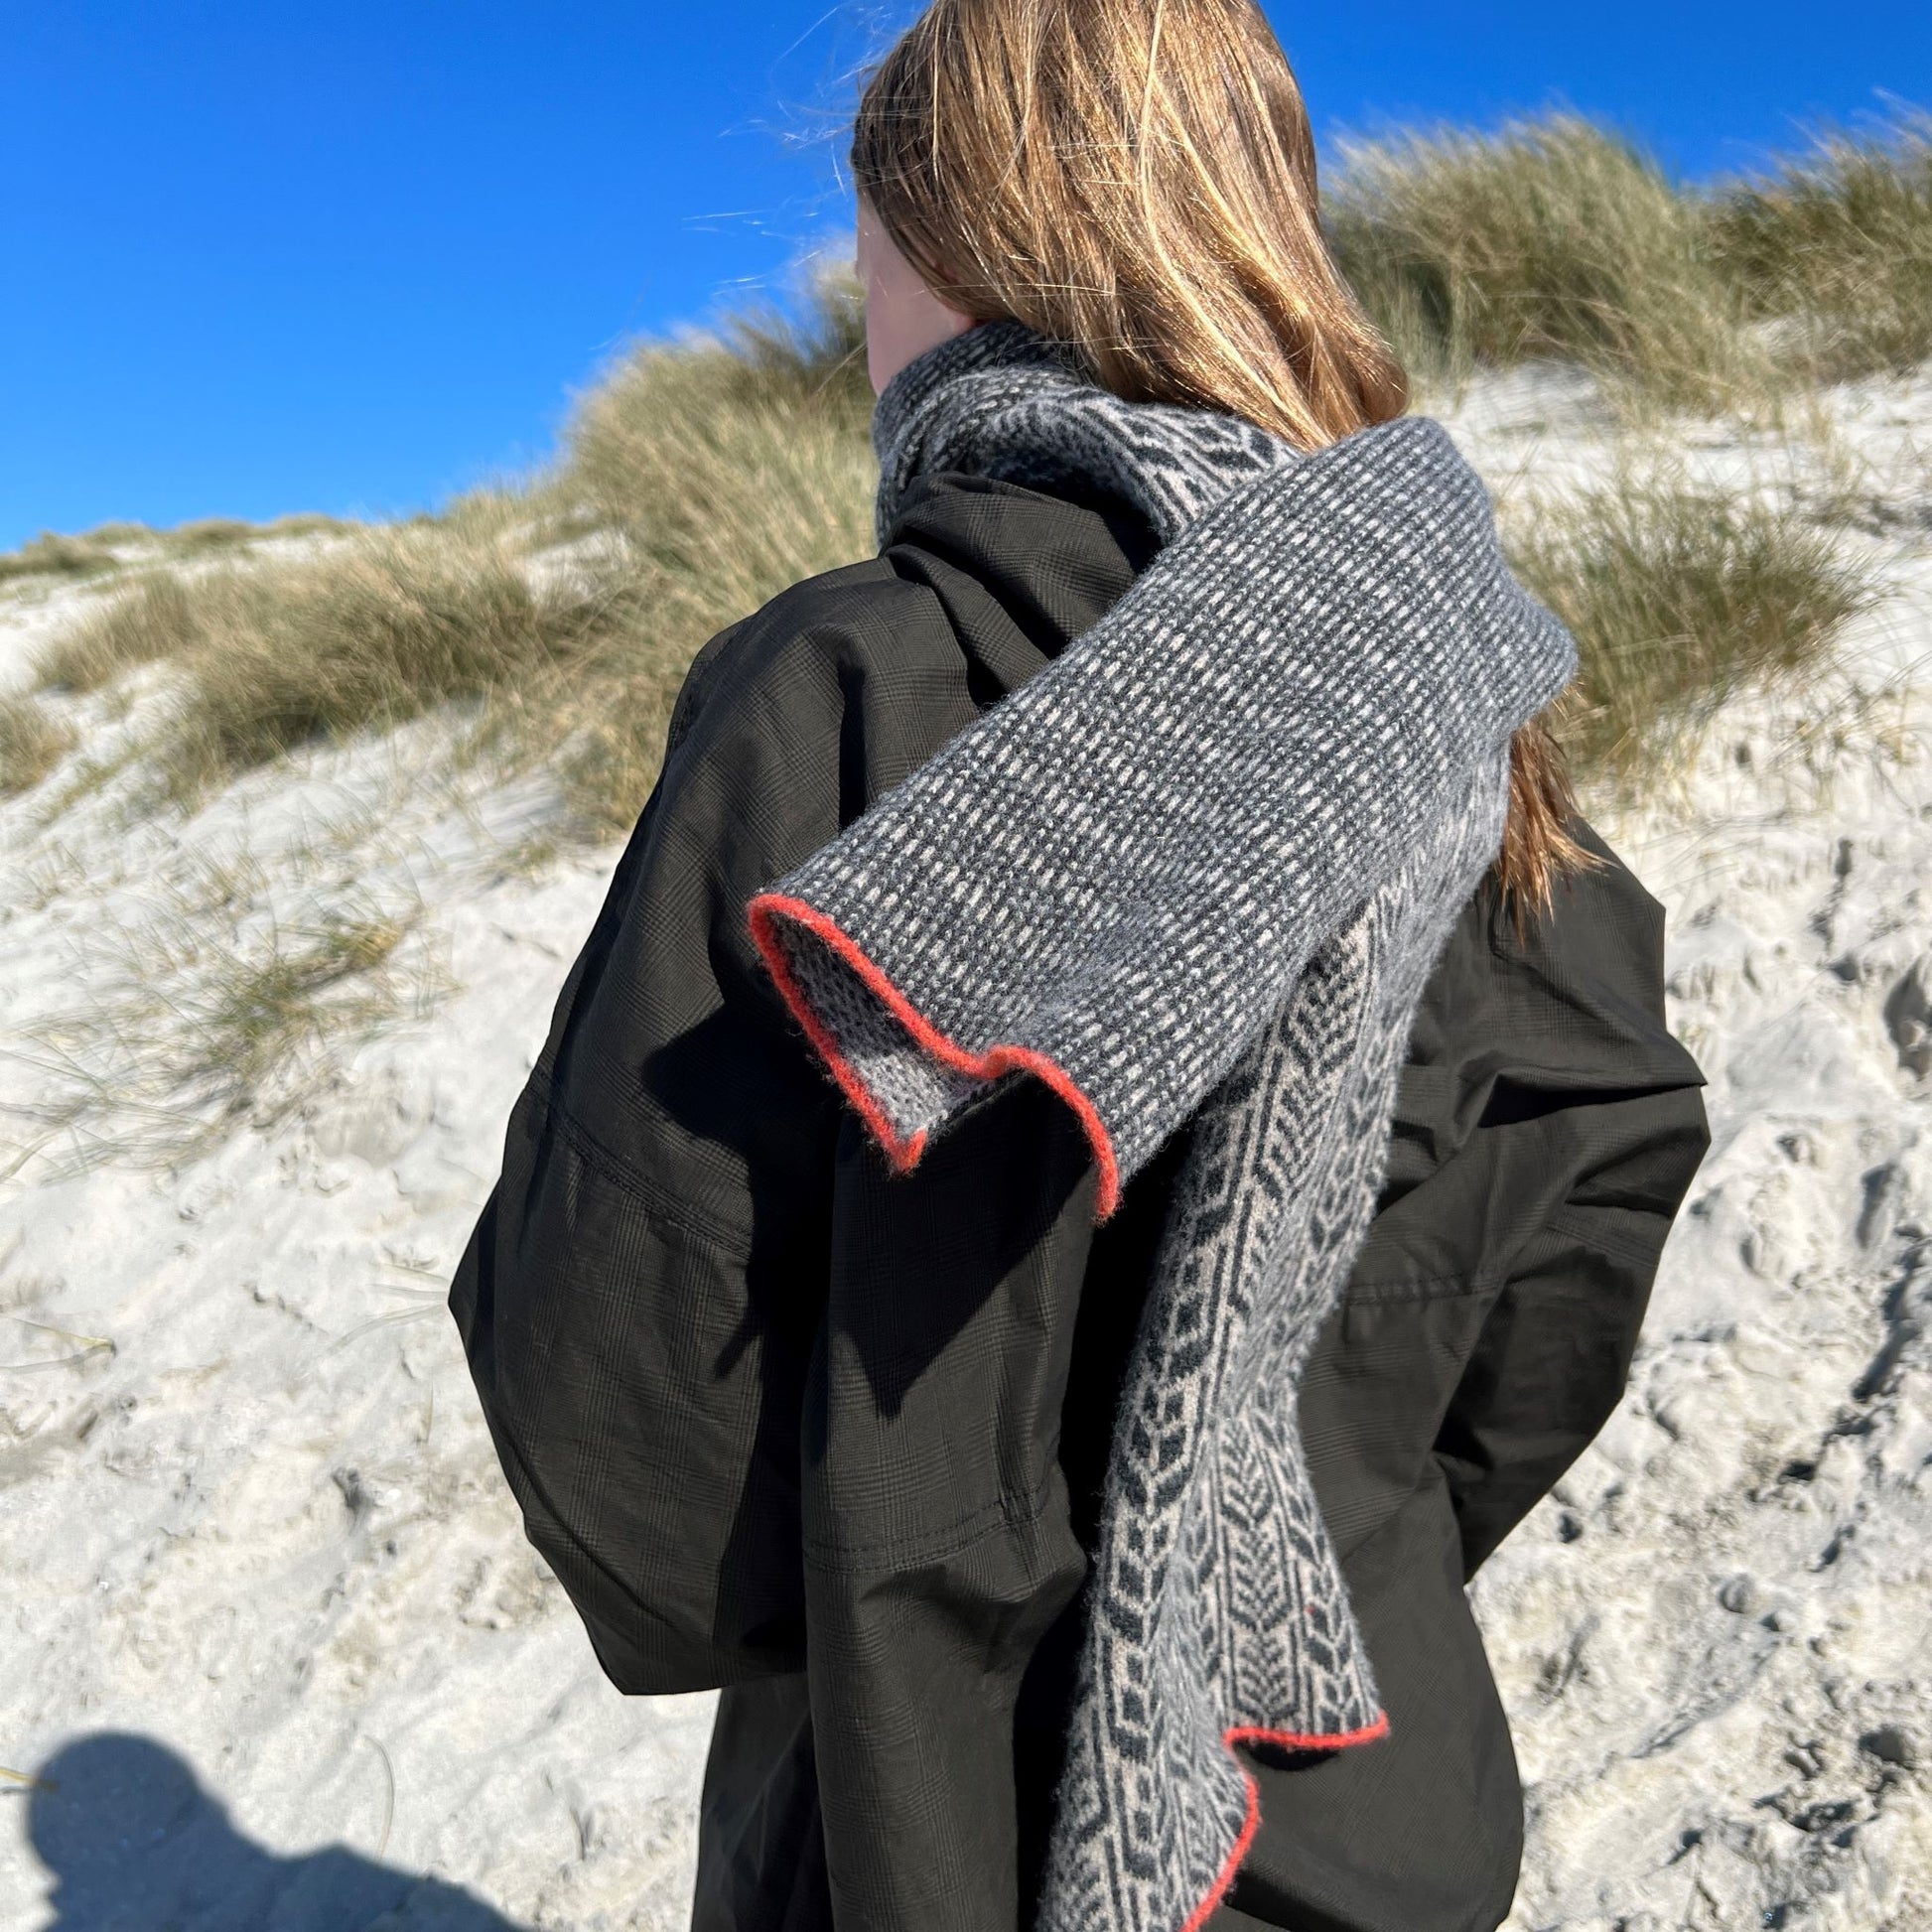 All our scarves are knitted using a punch-card system on a manual vintage knitting machine and are 100% Merino lamb's wool.  Dry clean or wash by hand. Seen here in Pebble.